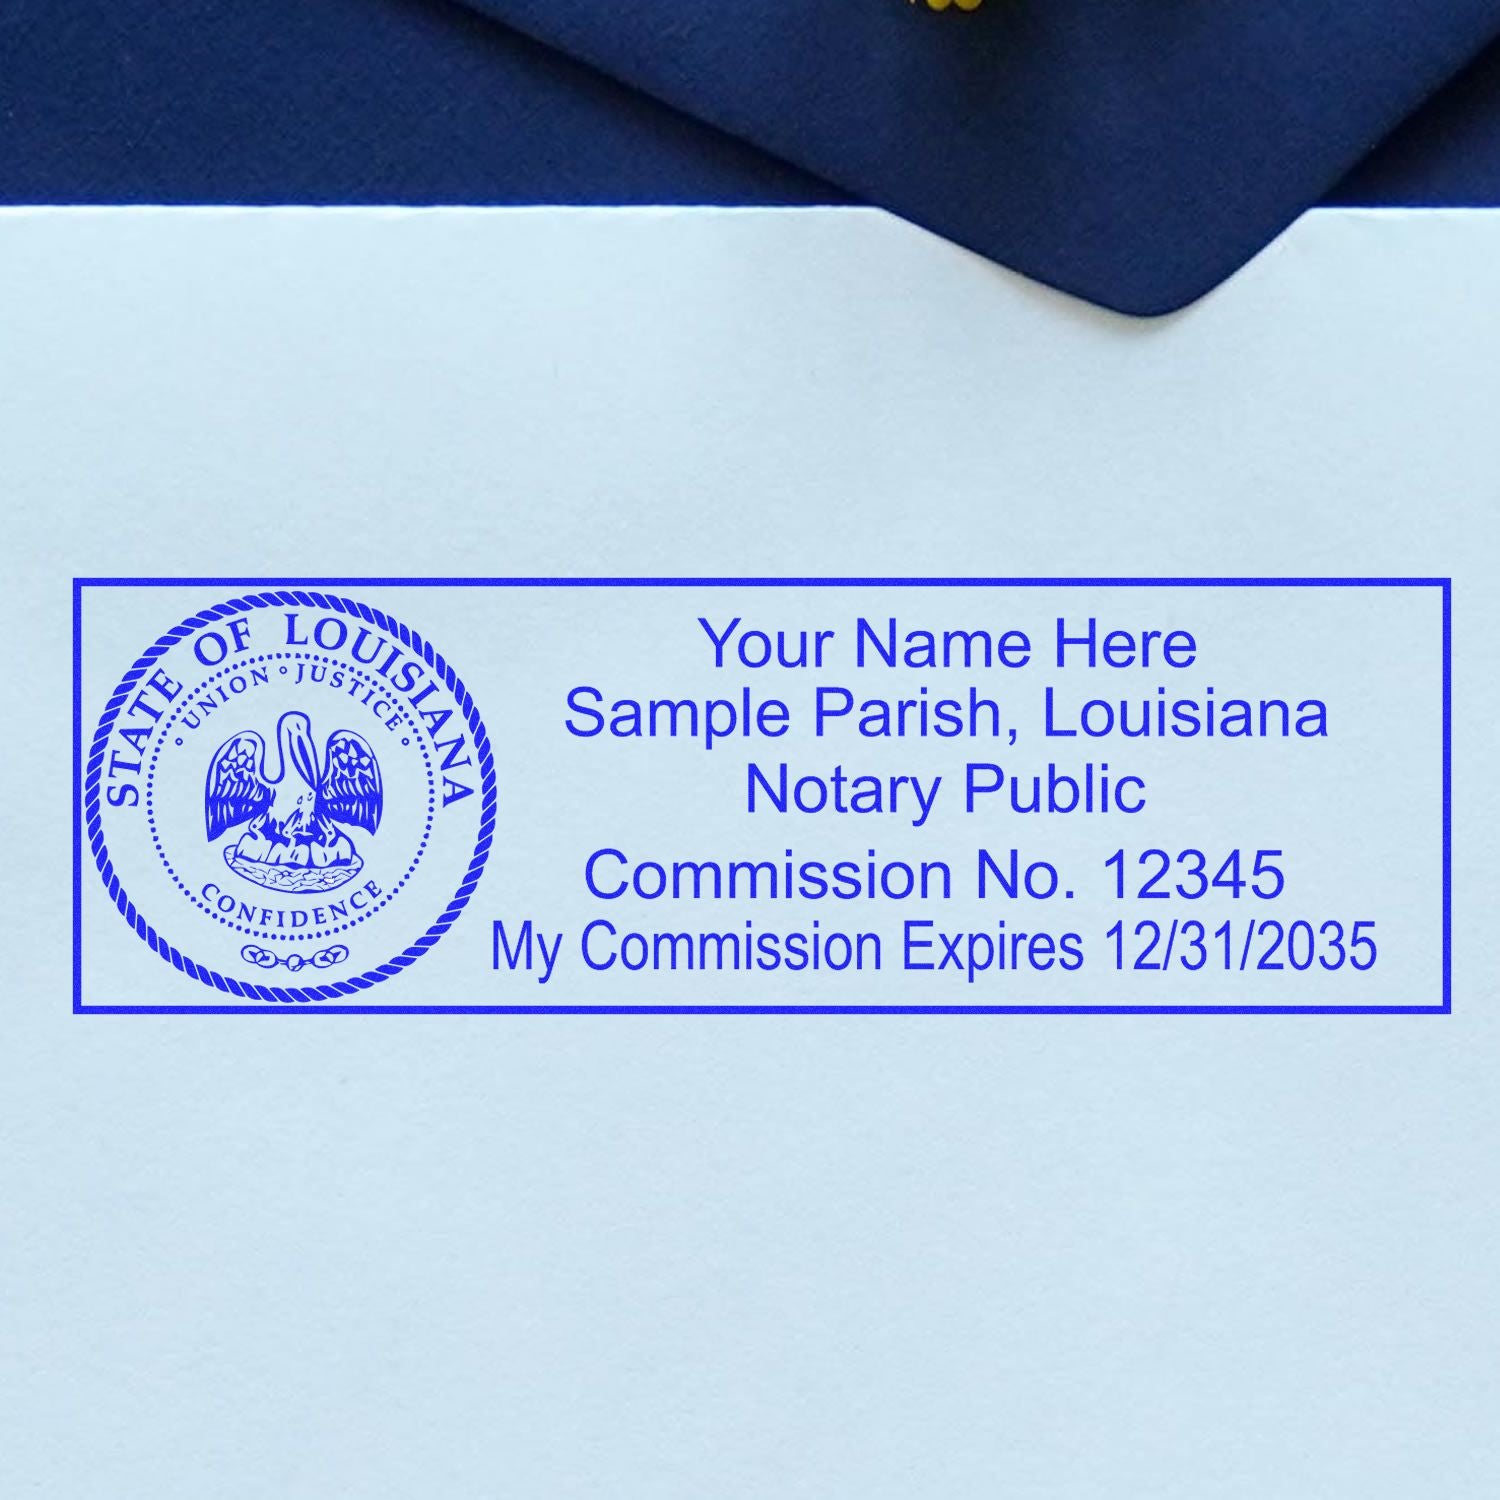 The PSI Louisiana Notary Stamp stamp impression comes to life with a crisp, detailed photo on paper - showcasing true professional quality.